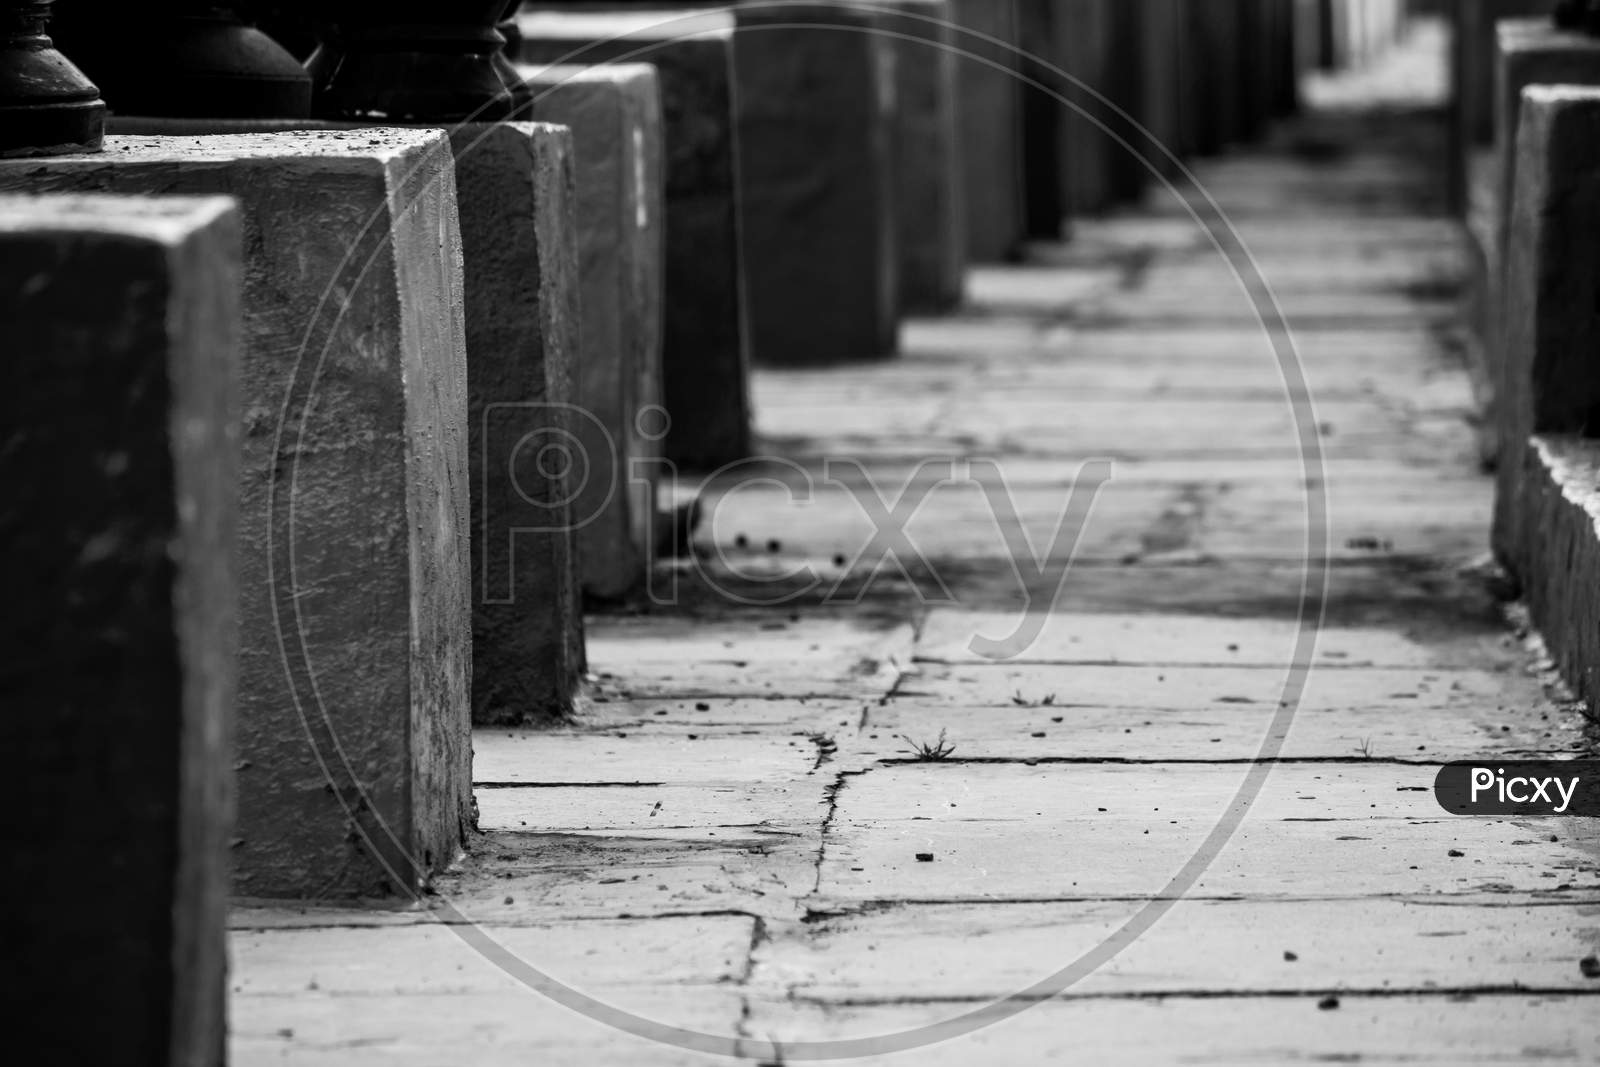 Path In A Temple To View The Idols(Known As Lingams) Of God Shiva In A Temple, Kolar, India. Selective Focus